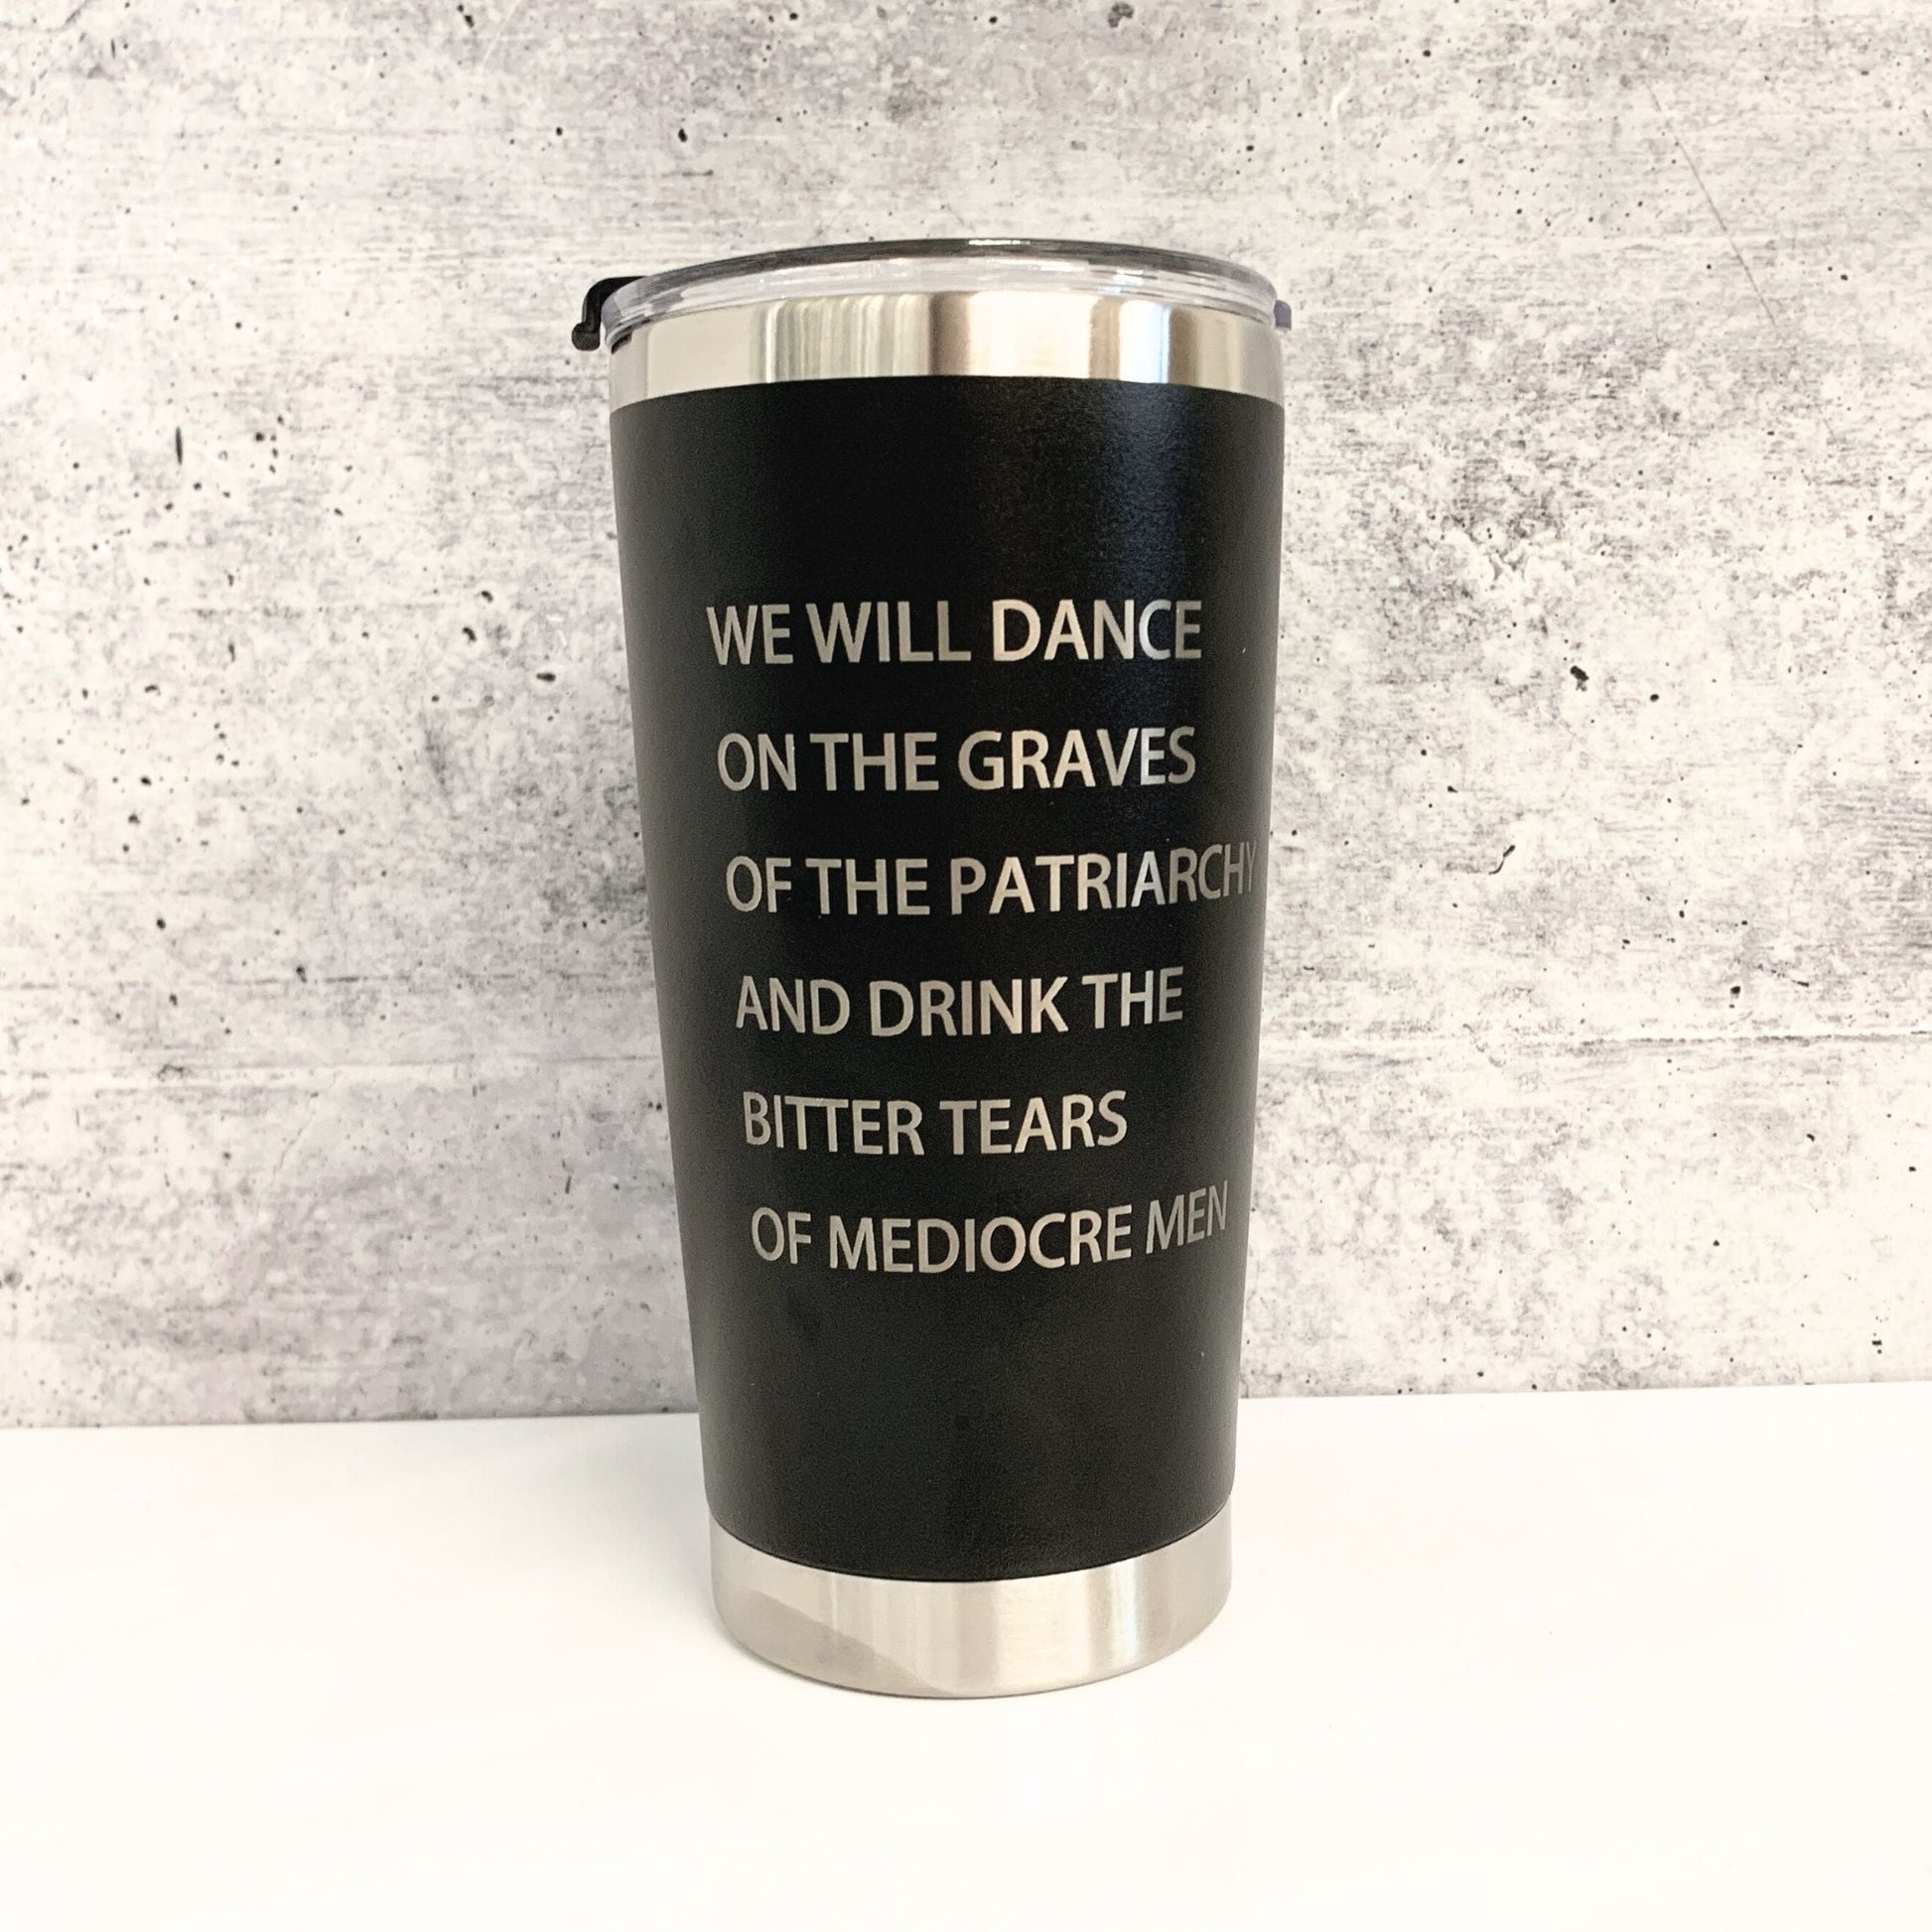 Feminist Goth Tumbler "Dance on the Graves of the Patriarchy" Stainless Steel Hot or Cold